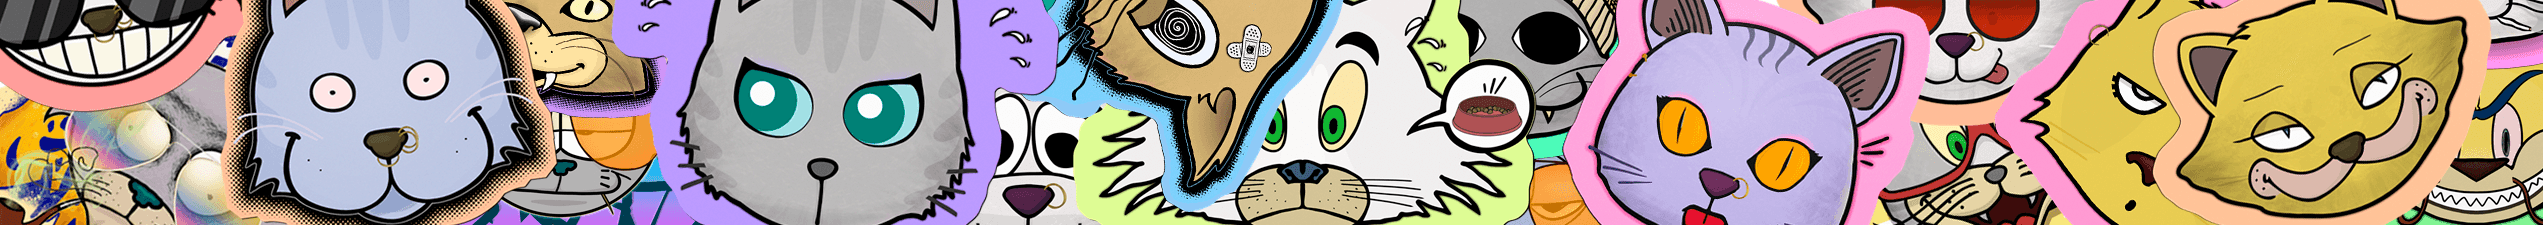 RetroCats_by_Sed banner